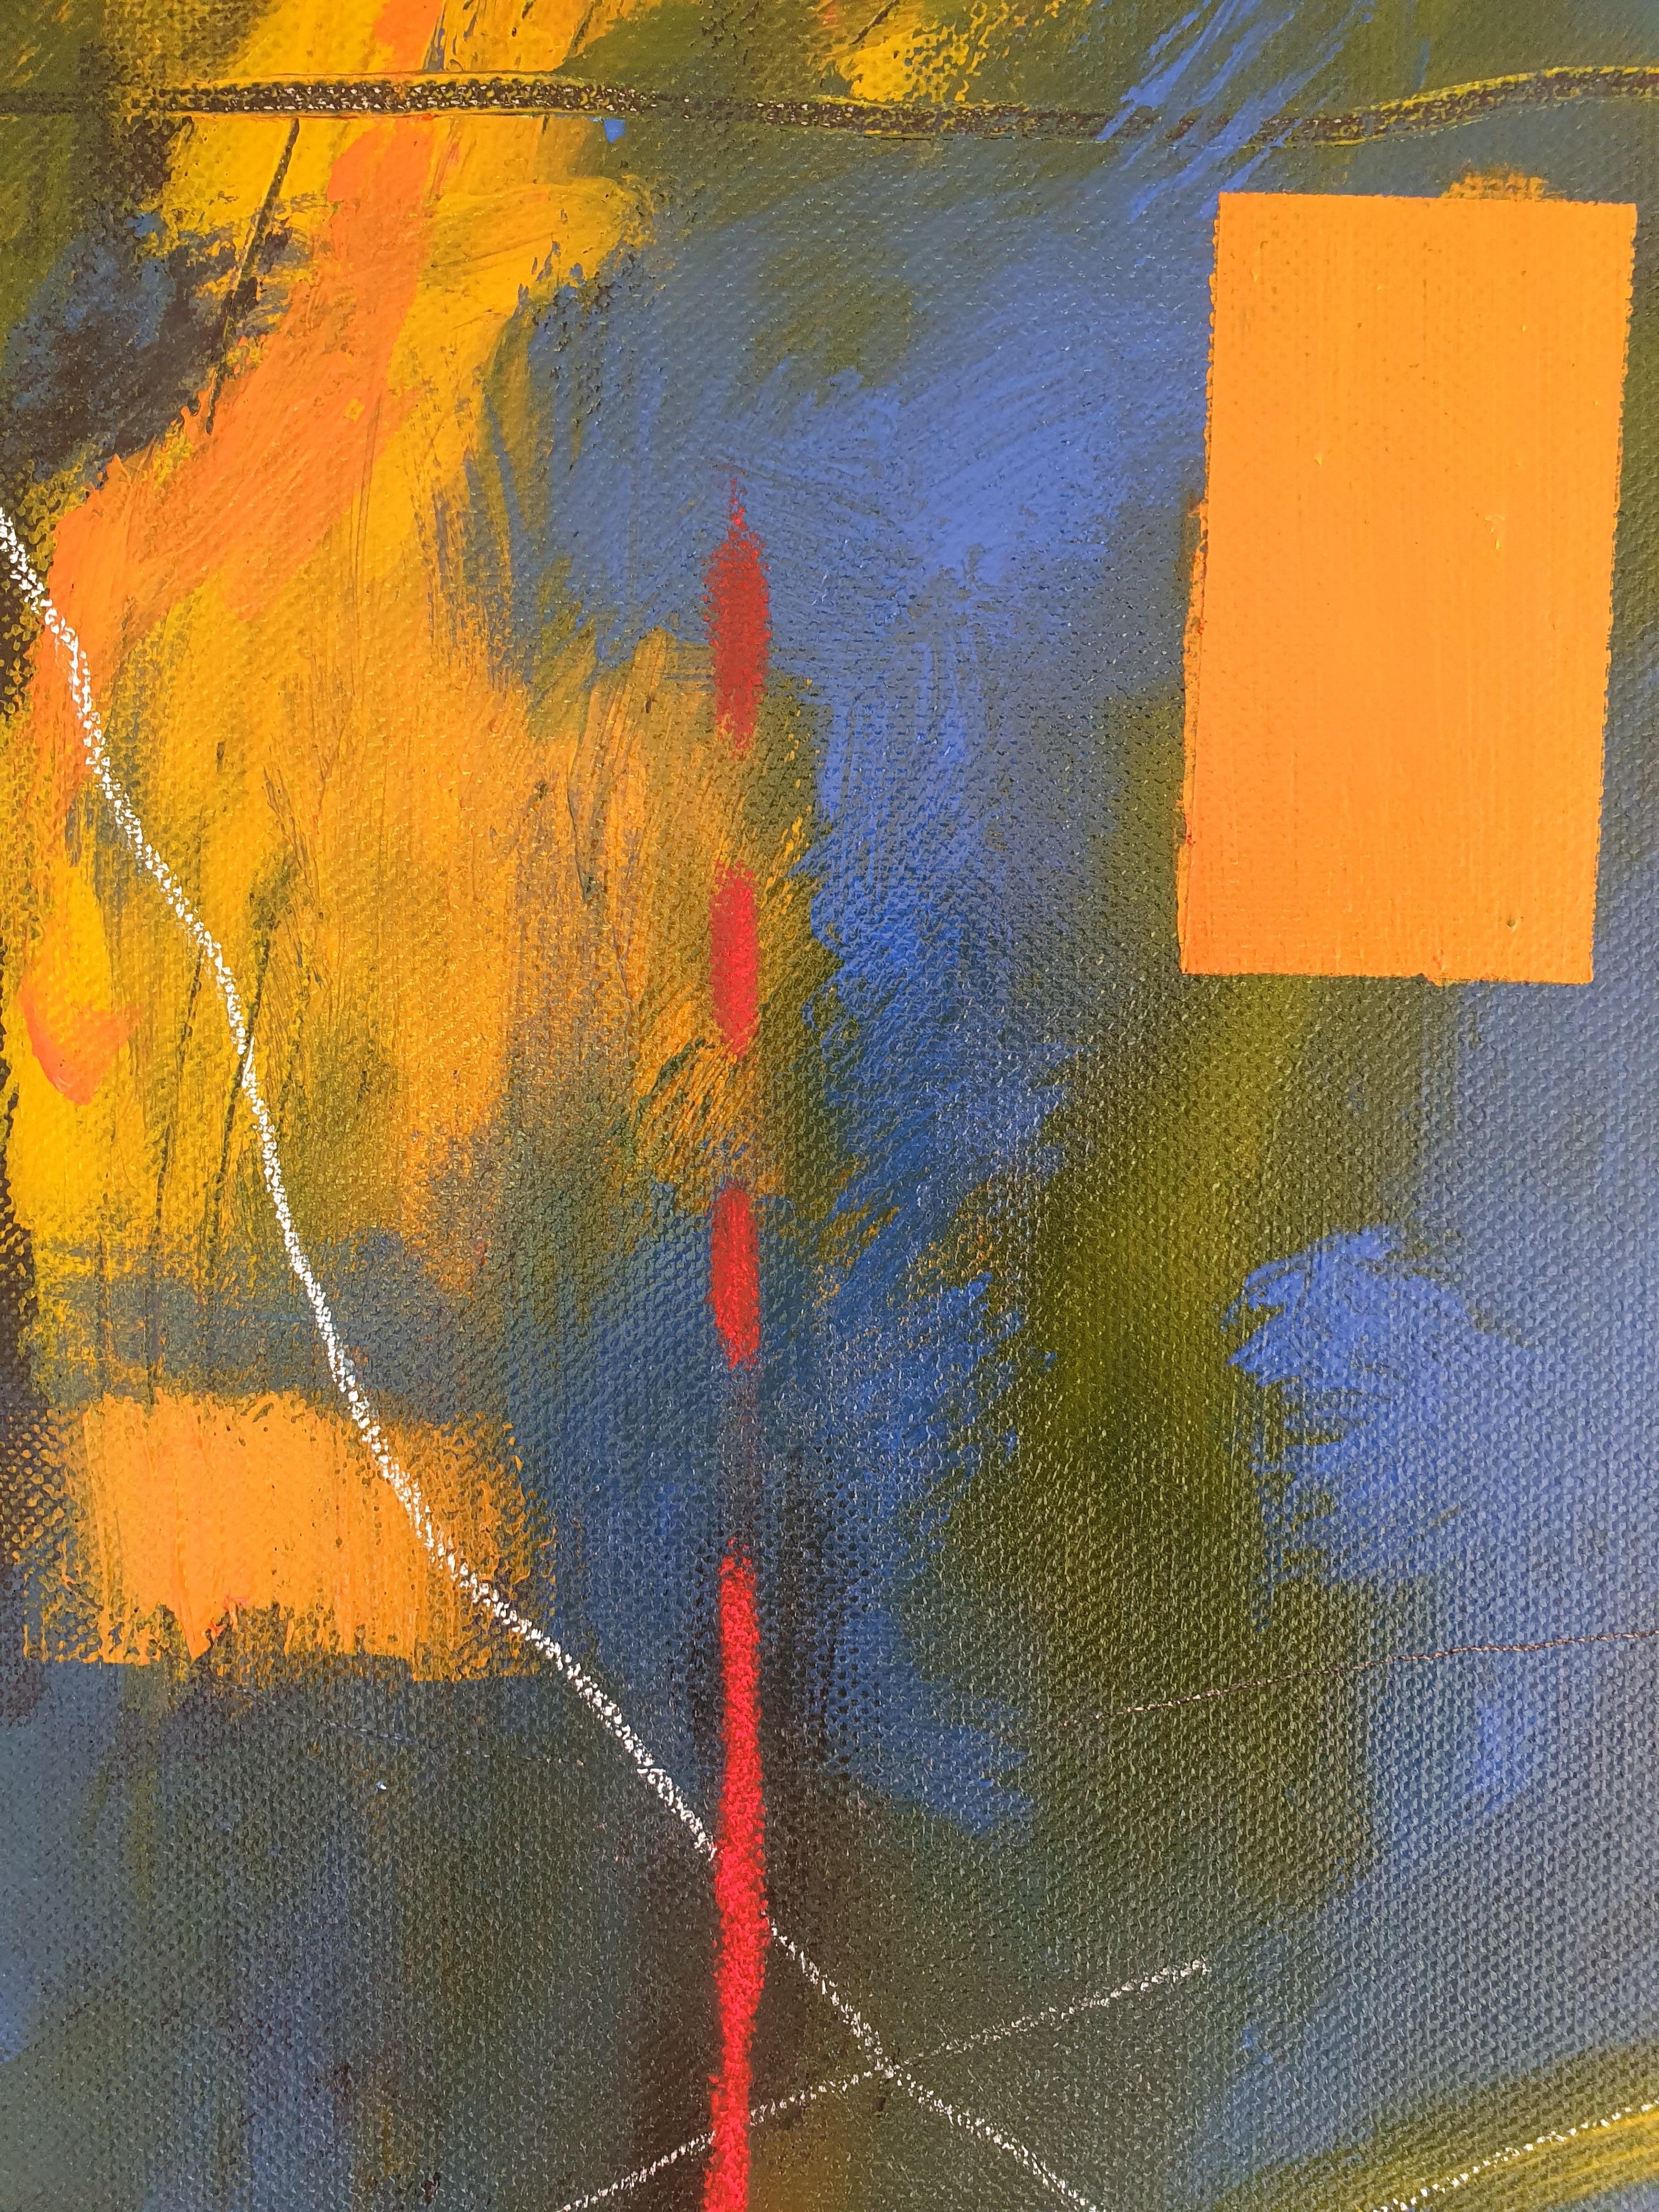 Title: Interconnected Dream
Bold Abstract Contemporary Colorful Masculine Investment Red Yellow Grey Blue Orange Texture Detail

This series expresses our unity and our interconnectedness. We are dancing to a traverse tune - and travel and move